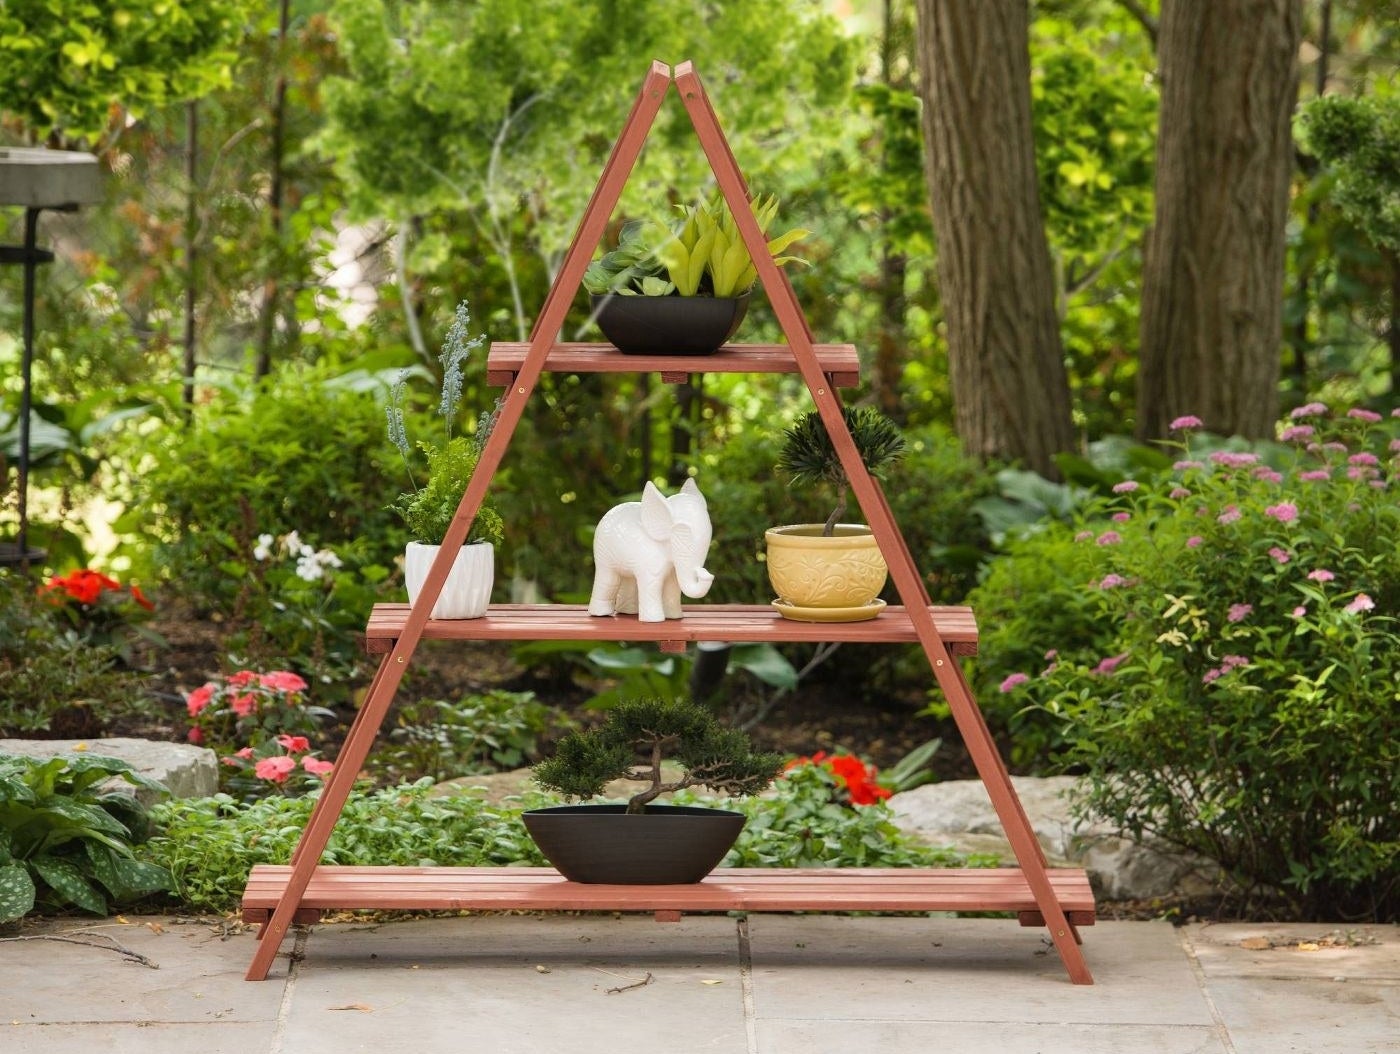 A triangular plant stand with three shelves 